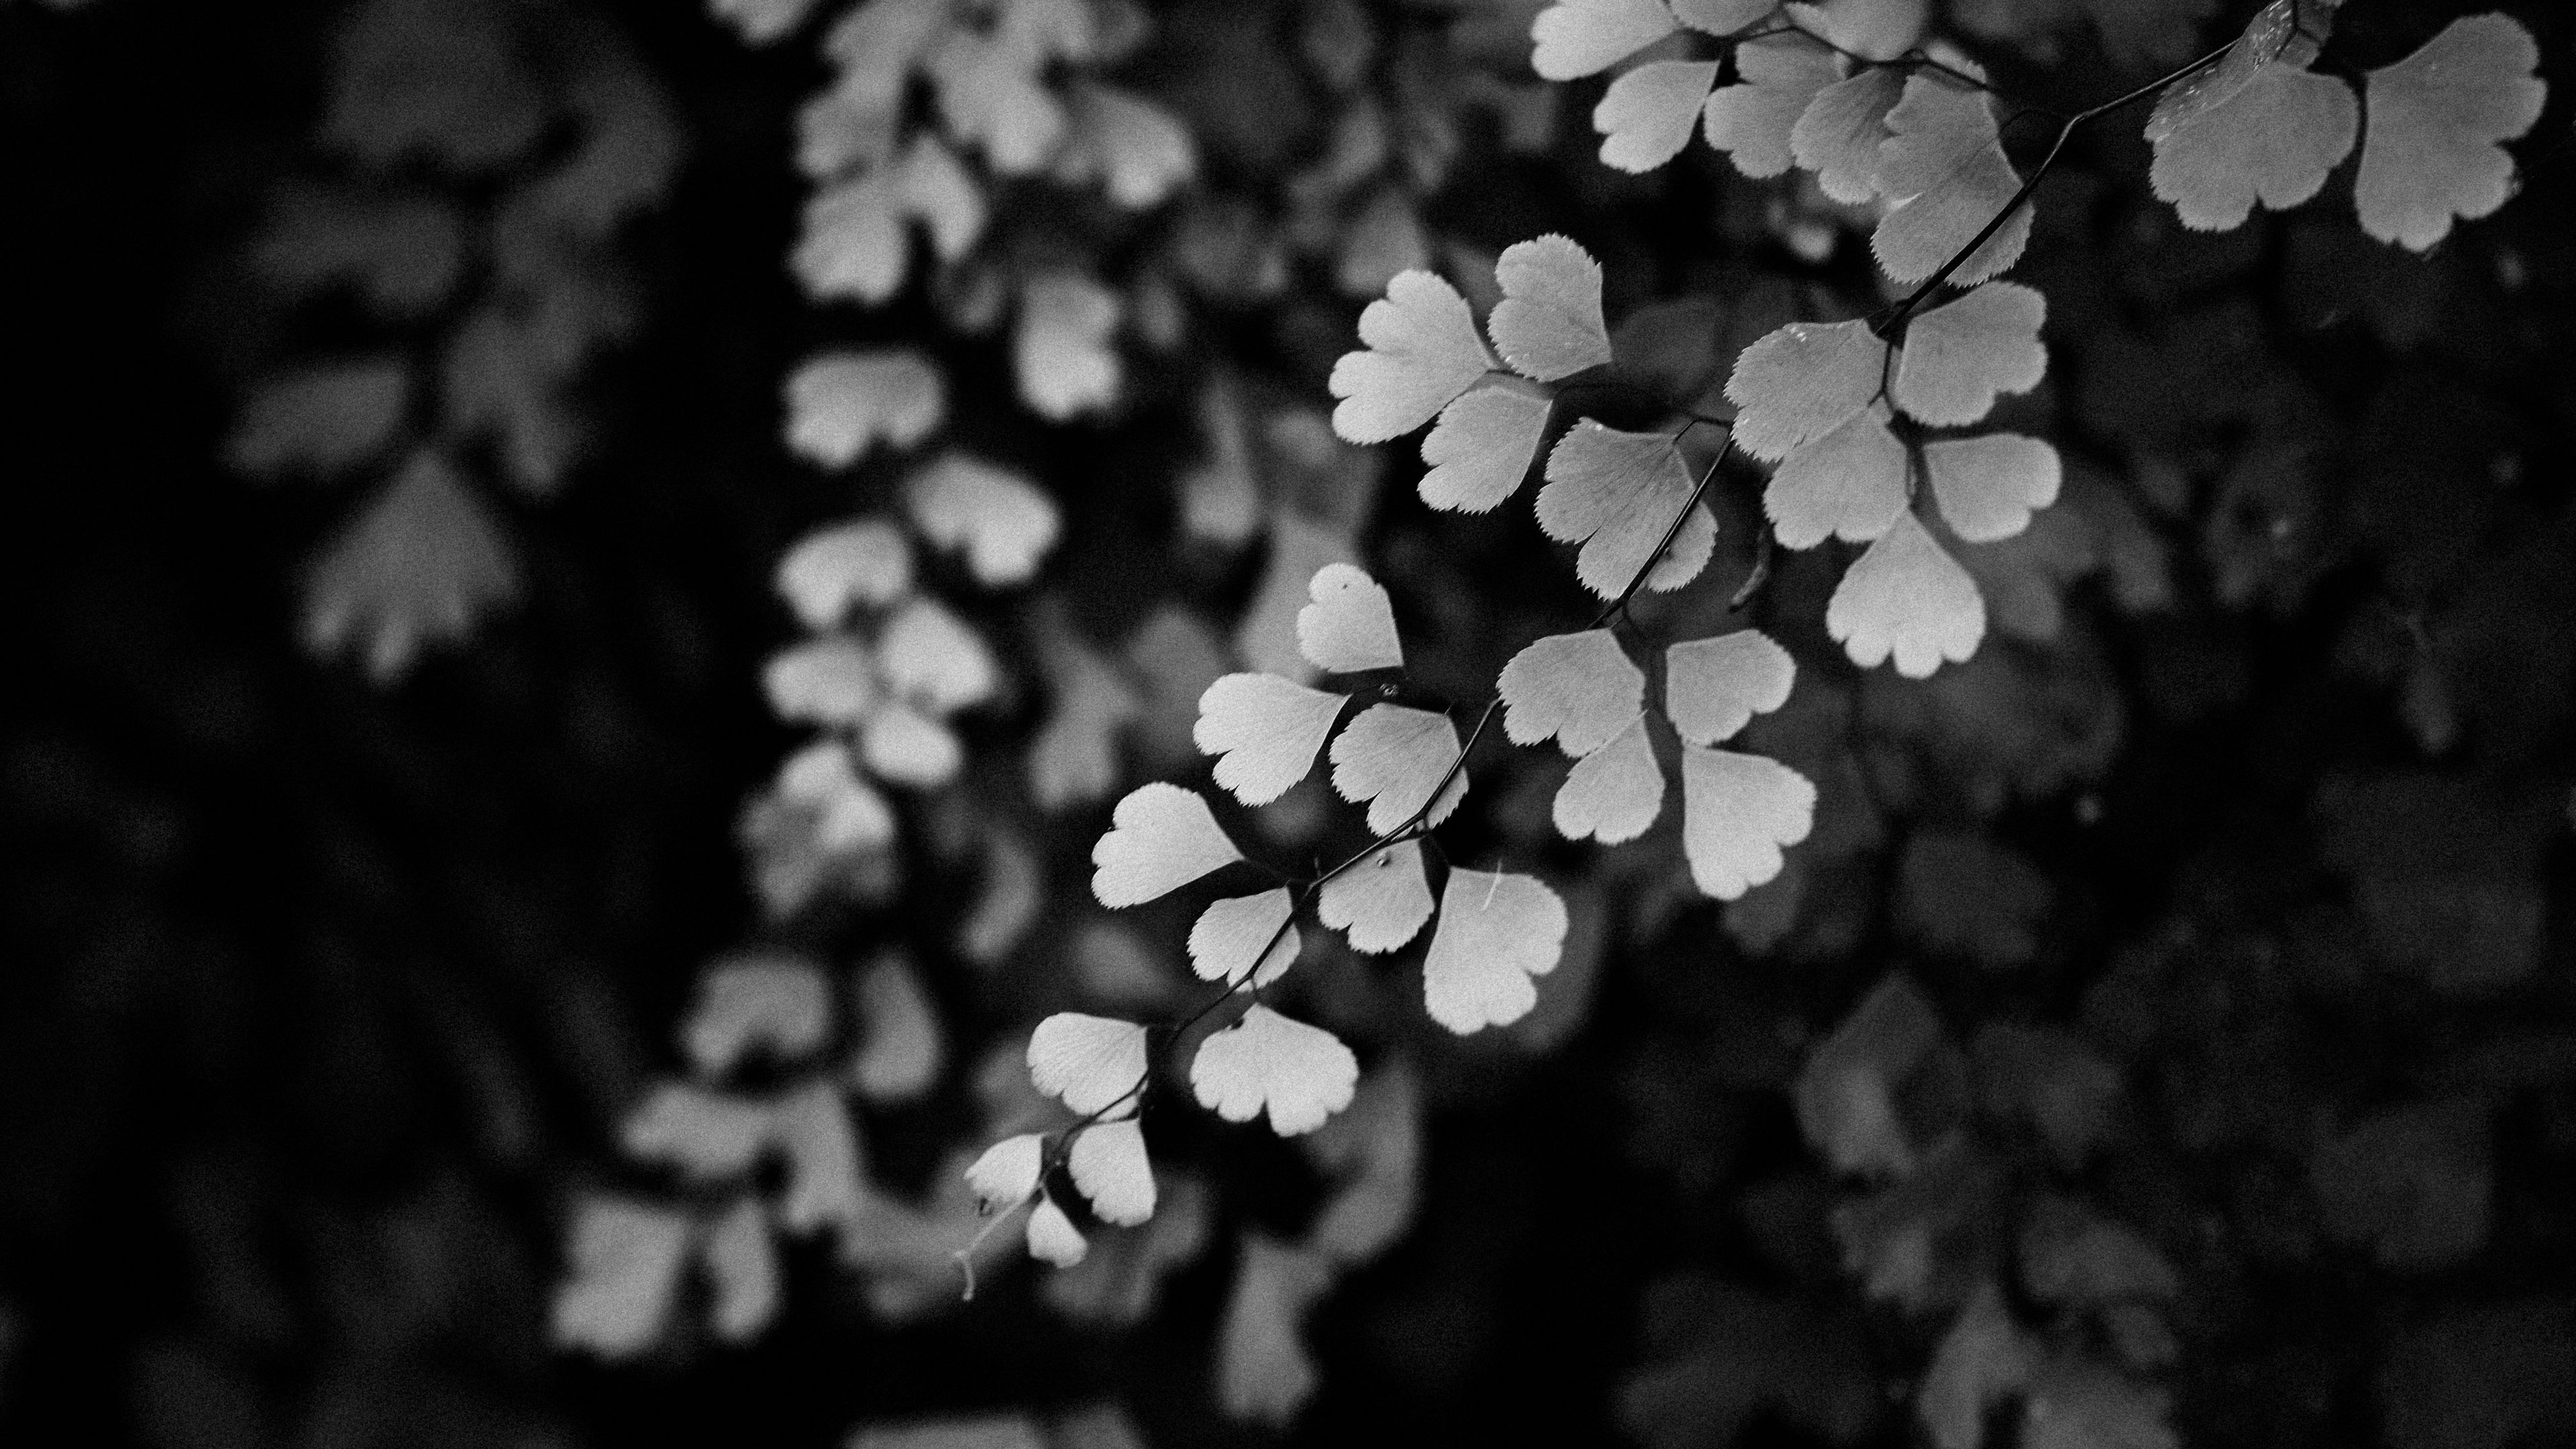 Download wallpaper 3840x2160 leaves, branches, black and white, macro